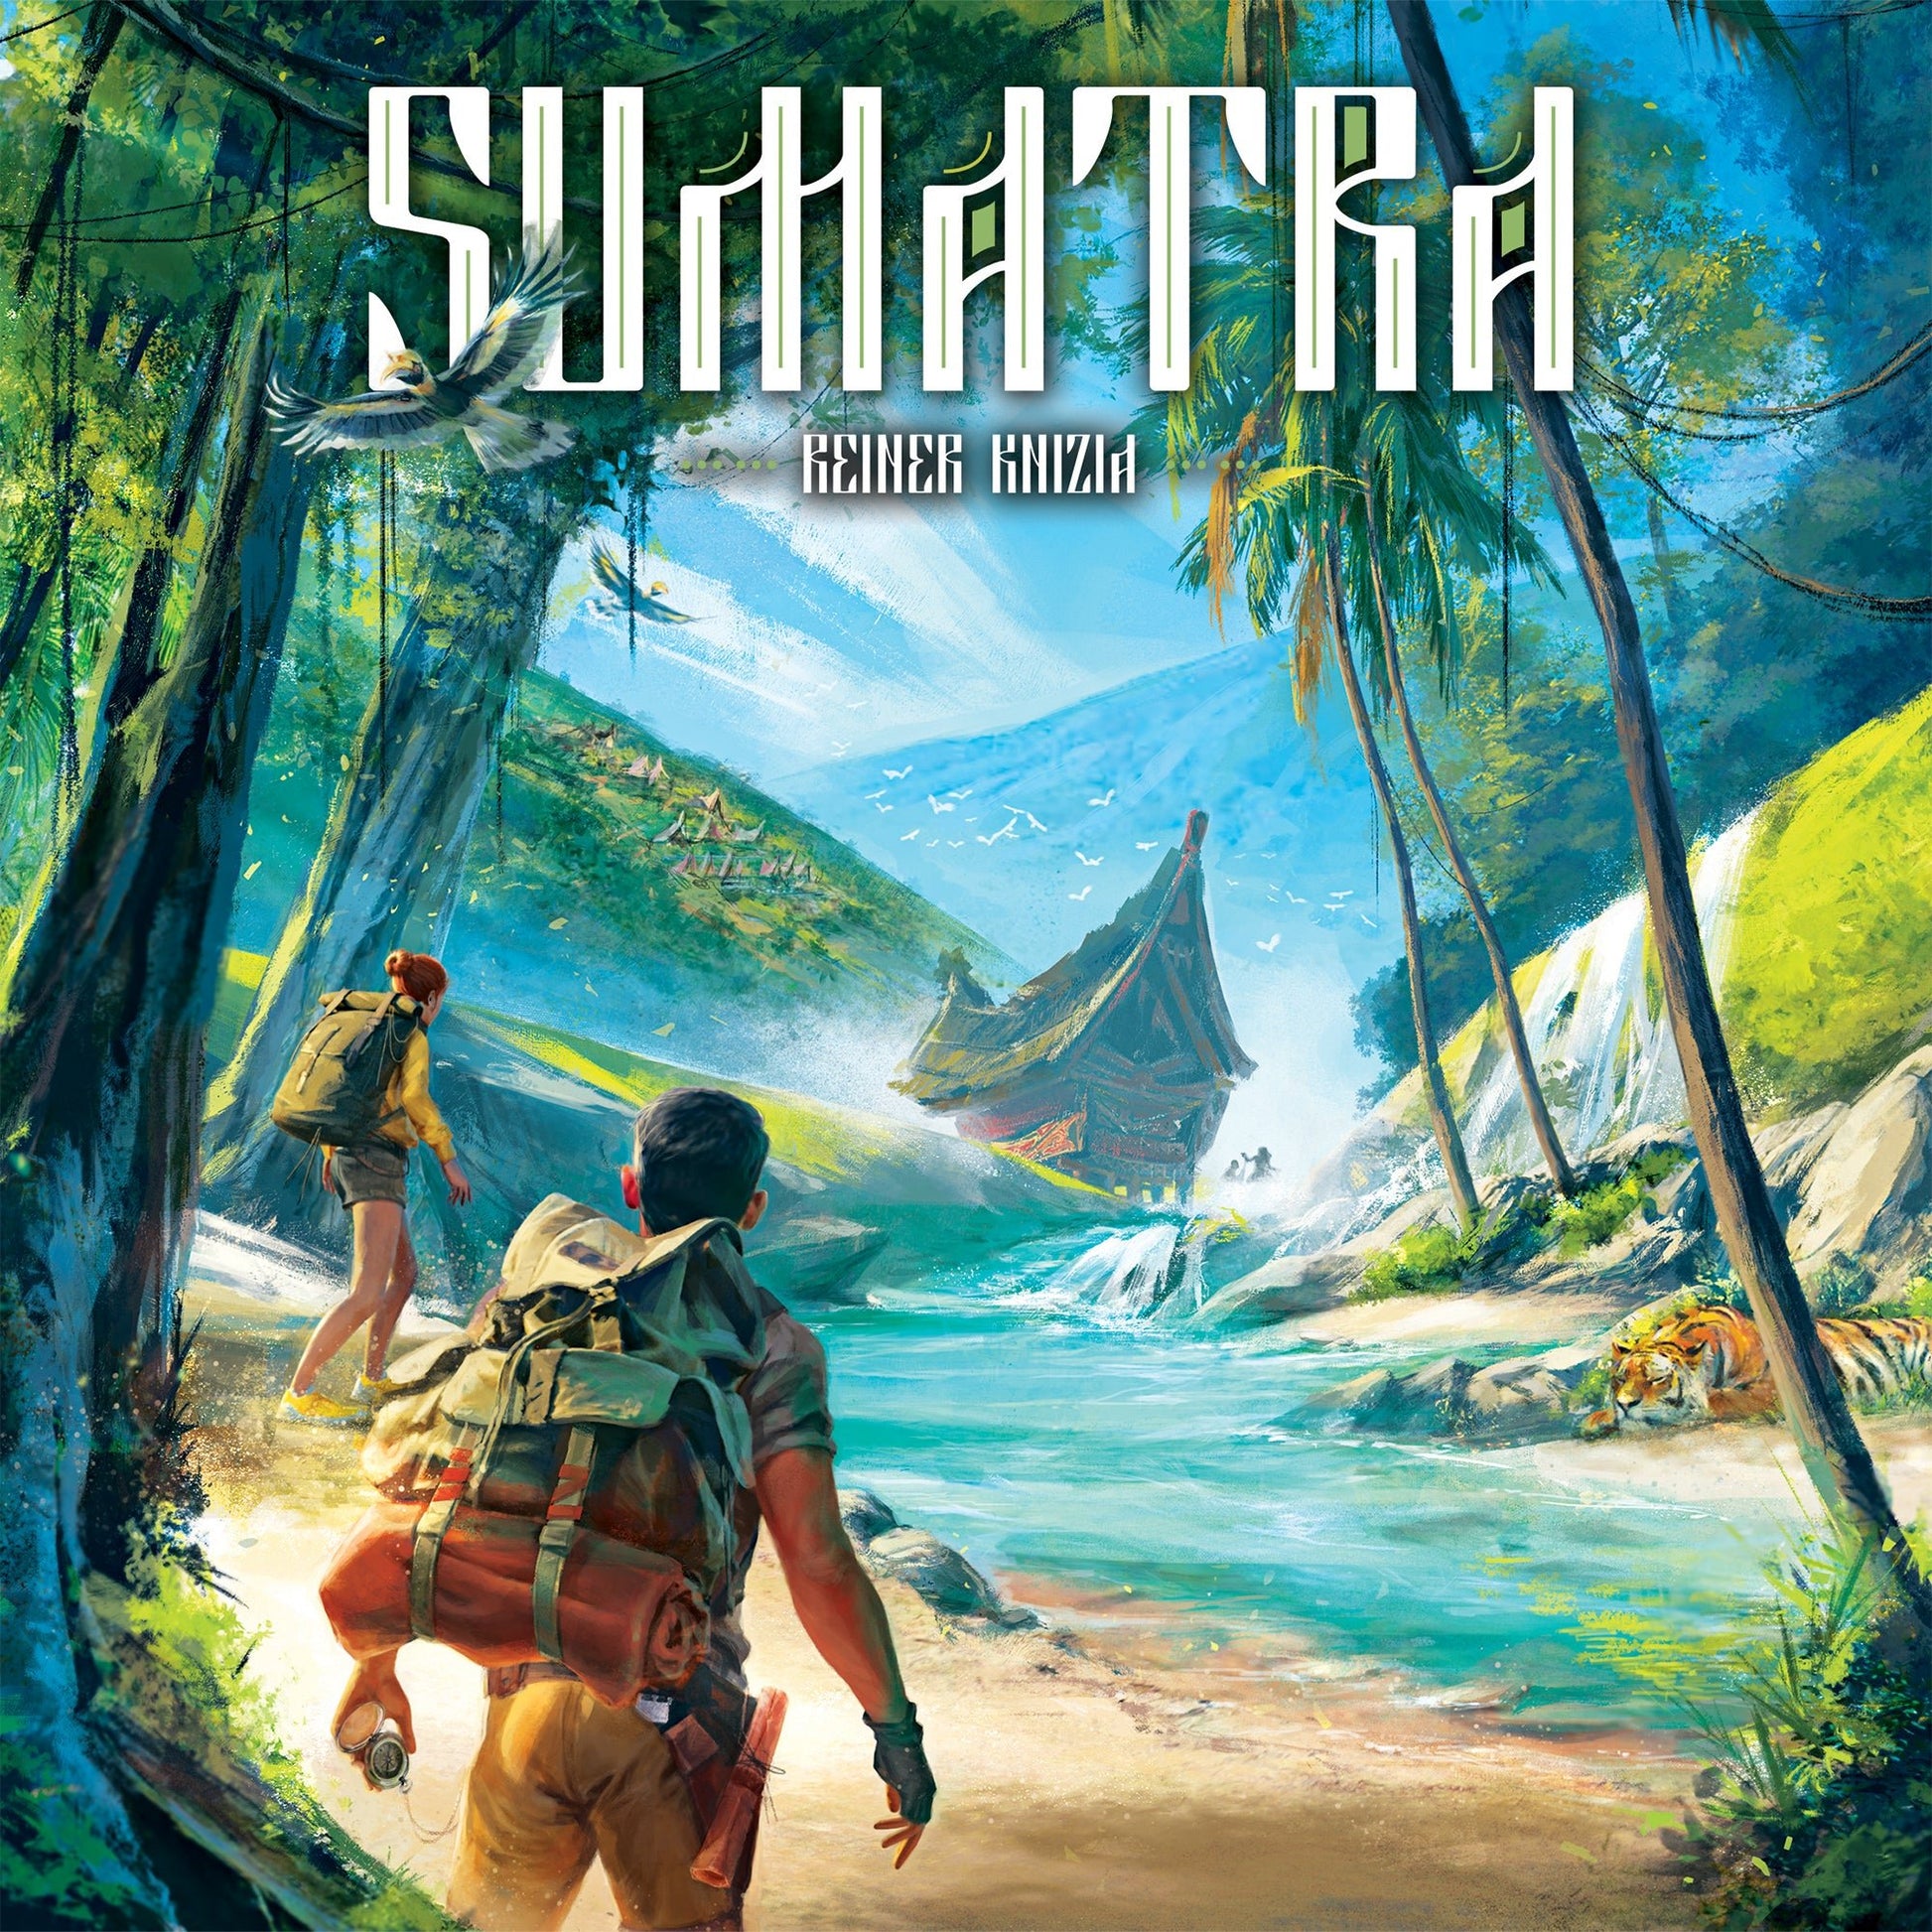 Sumatra - The Compleat Strategist